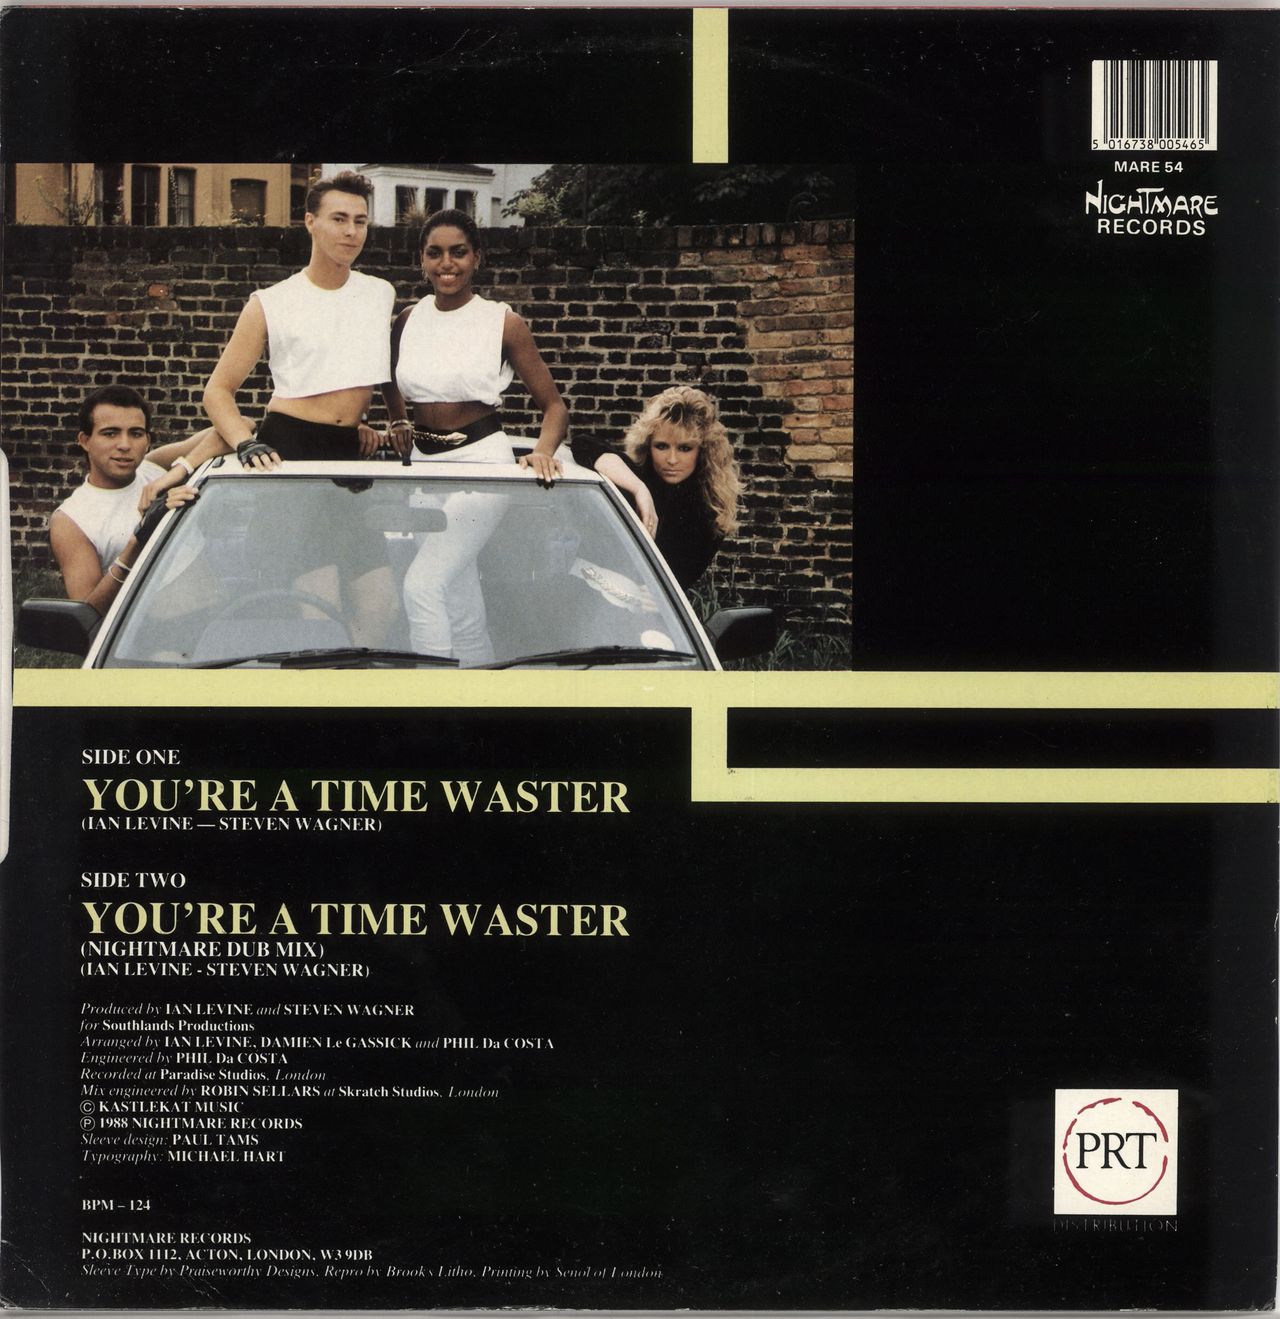 Croisette You're A Time Waster UK 12" vinyl single (12 inch record / Maxi-single) 5016738005465